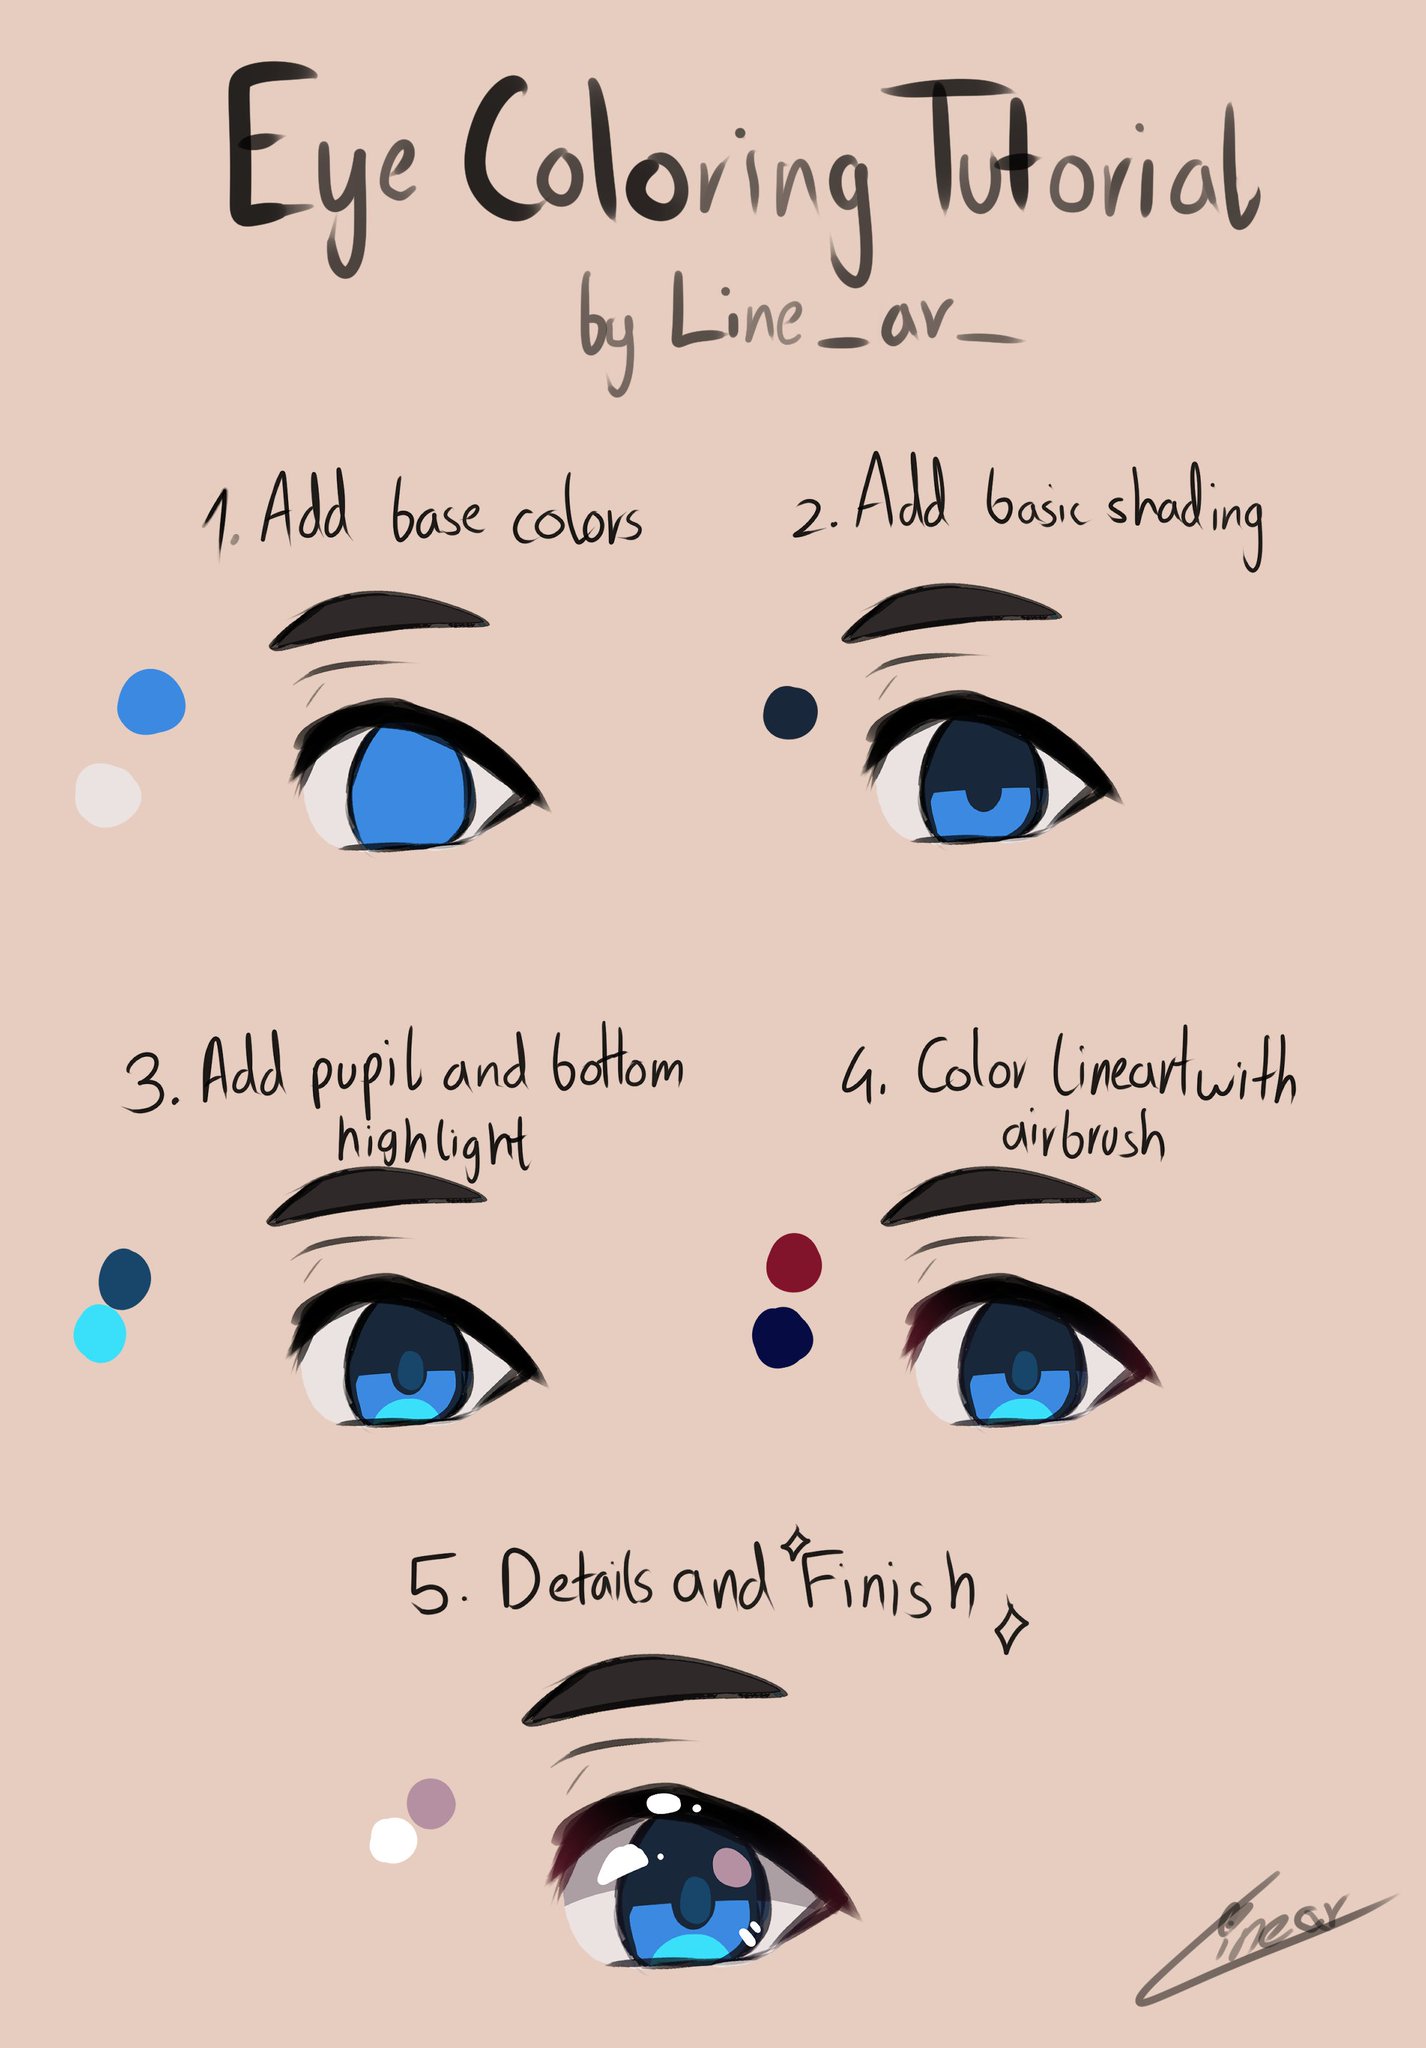 Ichigowarano  cf 16 AD08 on Twitter retweets r appreciated simple coloring  eyes tutorial i made last year uwu  i hope this would help ppl out   tutorial drawing ArtistOnTwitter eye 